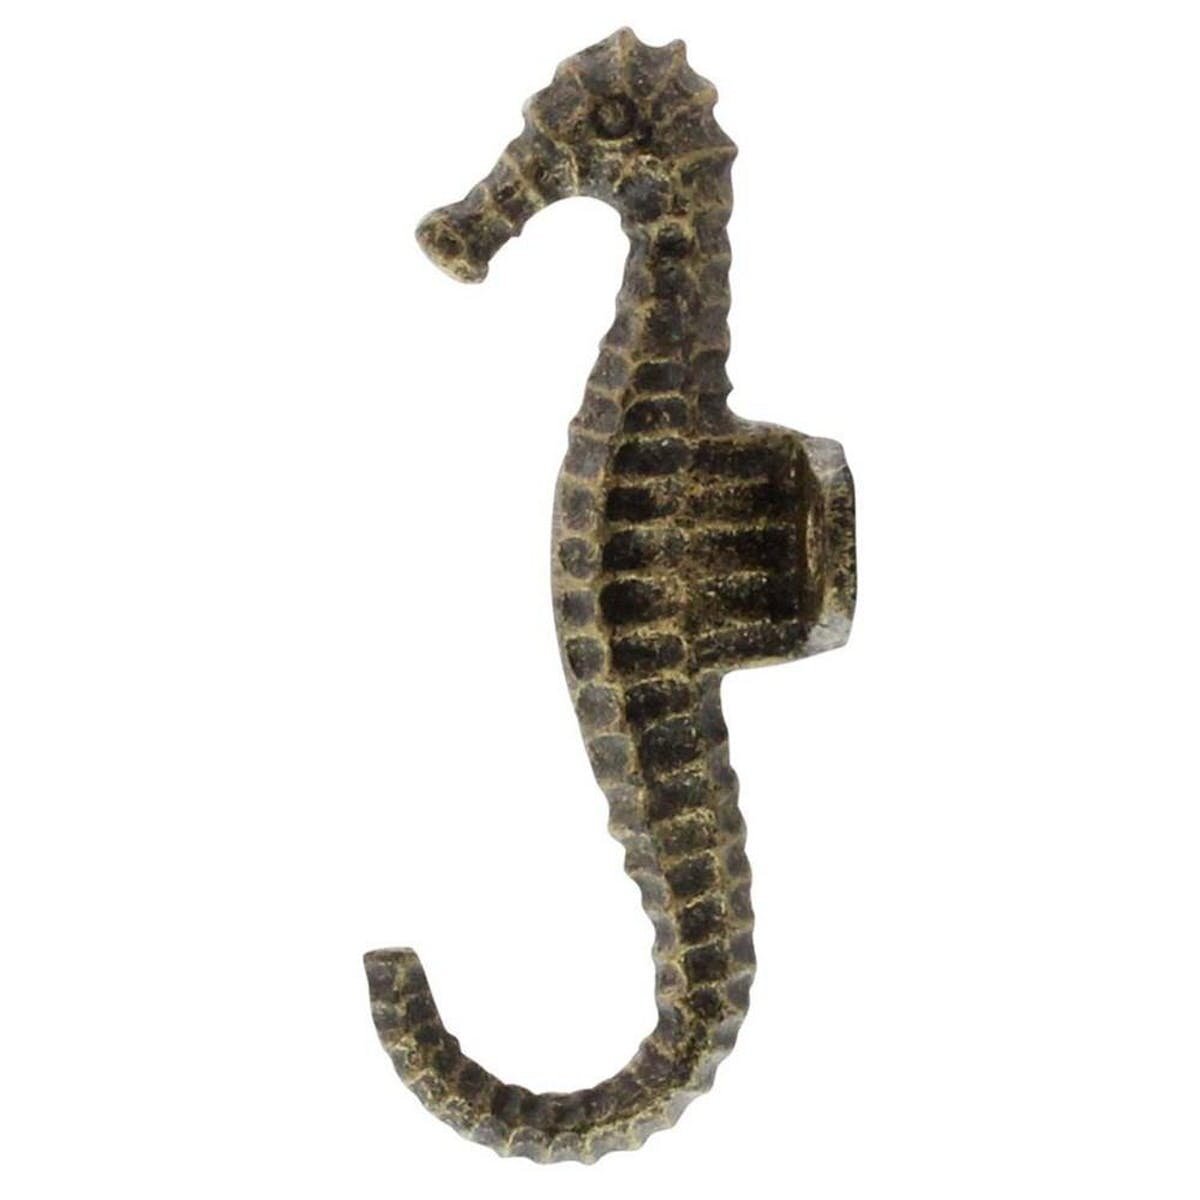 Decorative Ring Wall Hook - Long — Articulture Designs